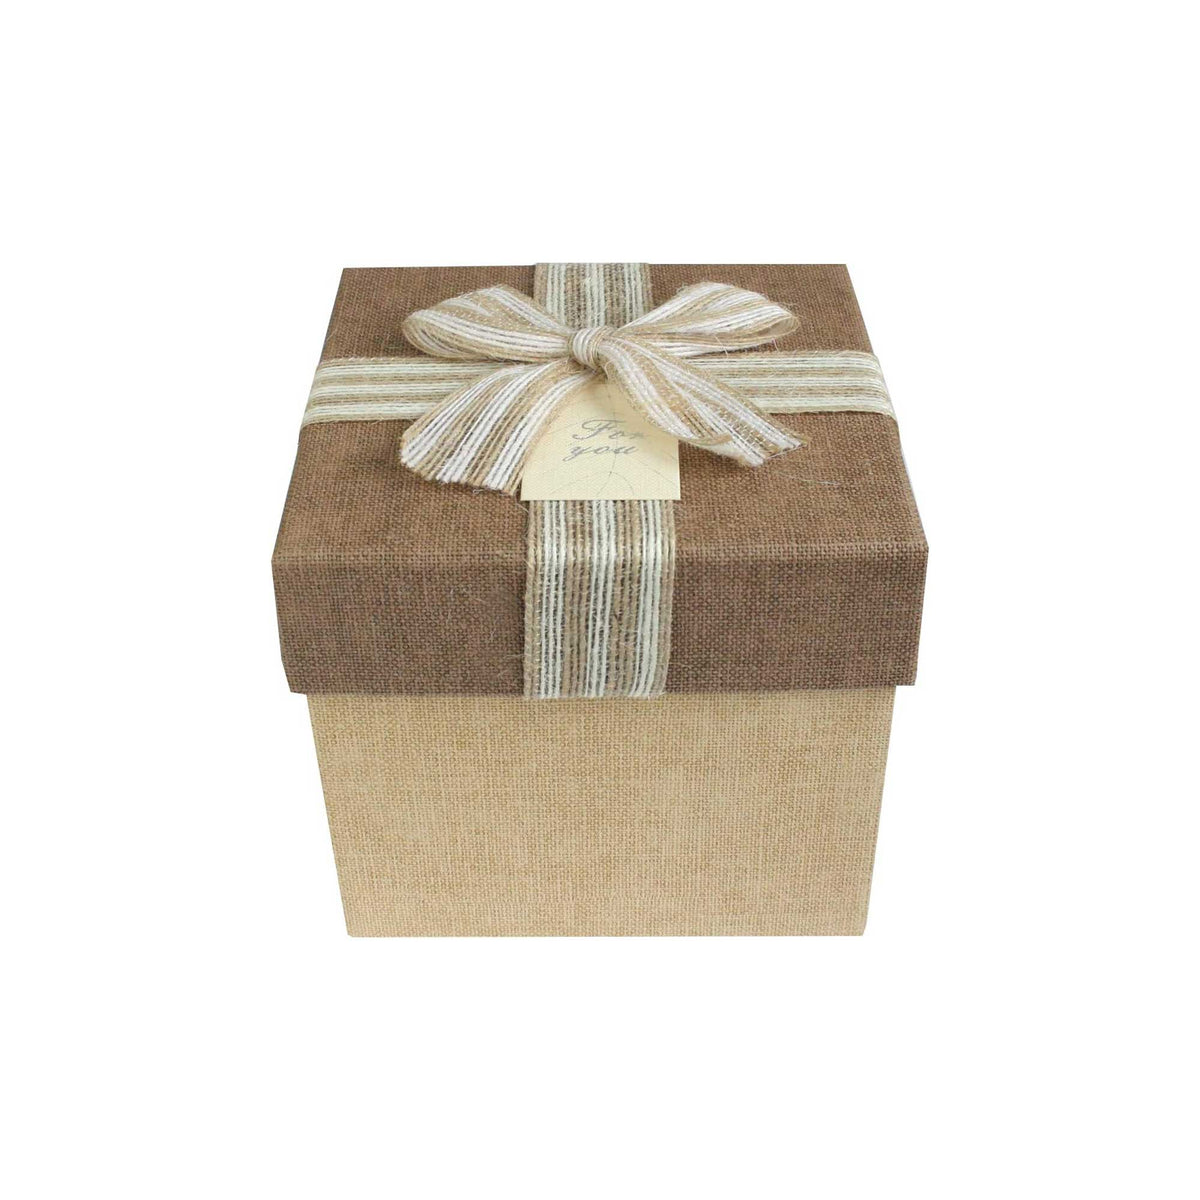 Rustic Natural Burlap Gift Box - Single (Sizes Available)